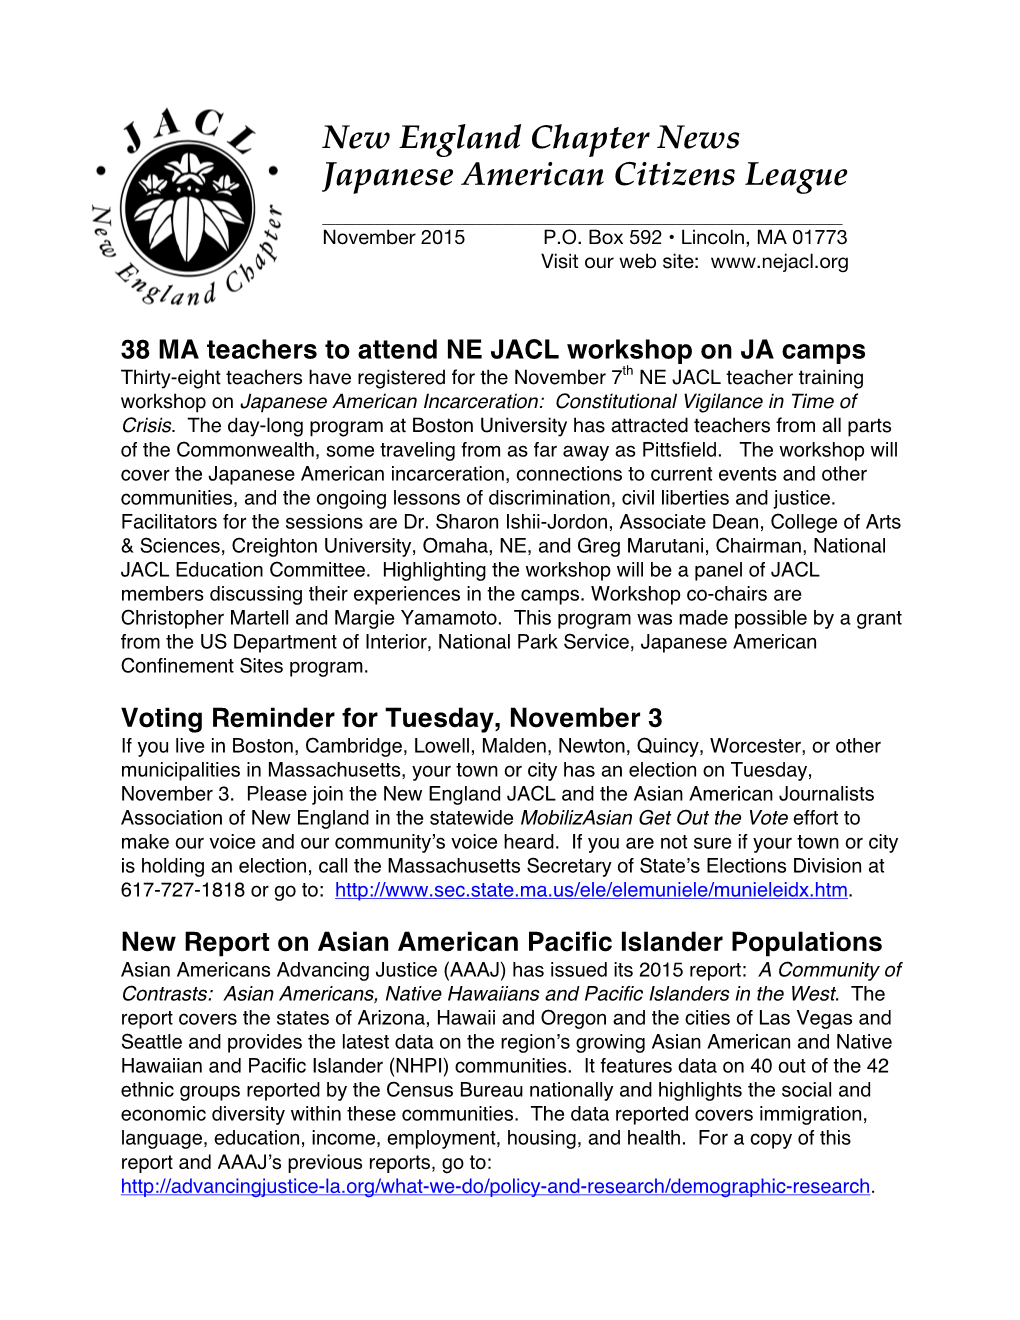 New England Chapter News Japanese American Citizens League